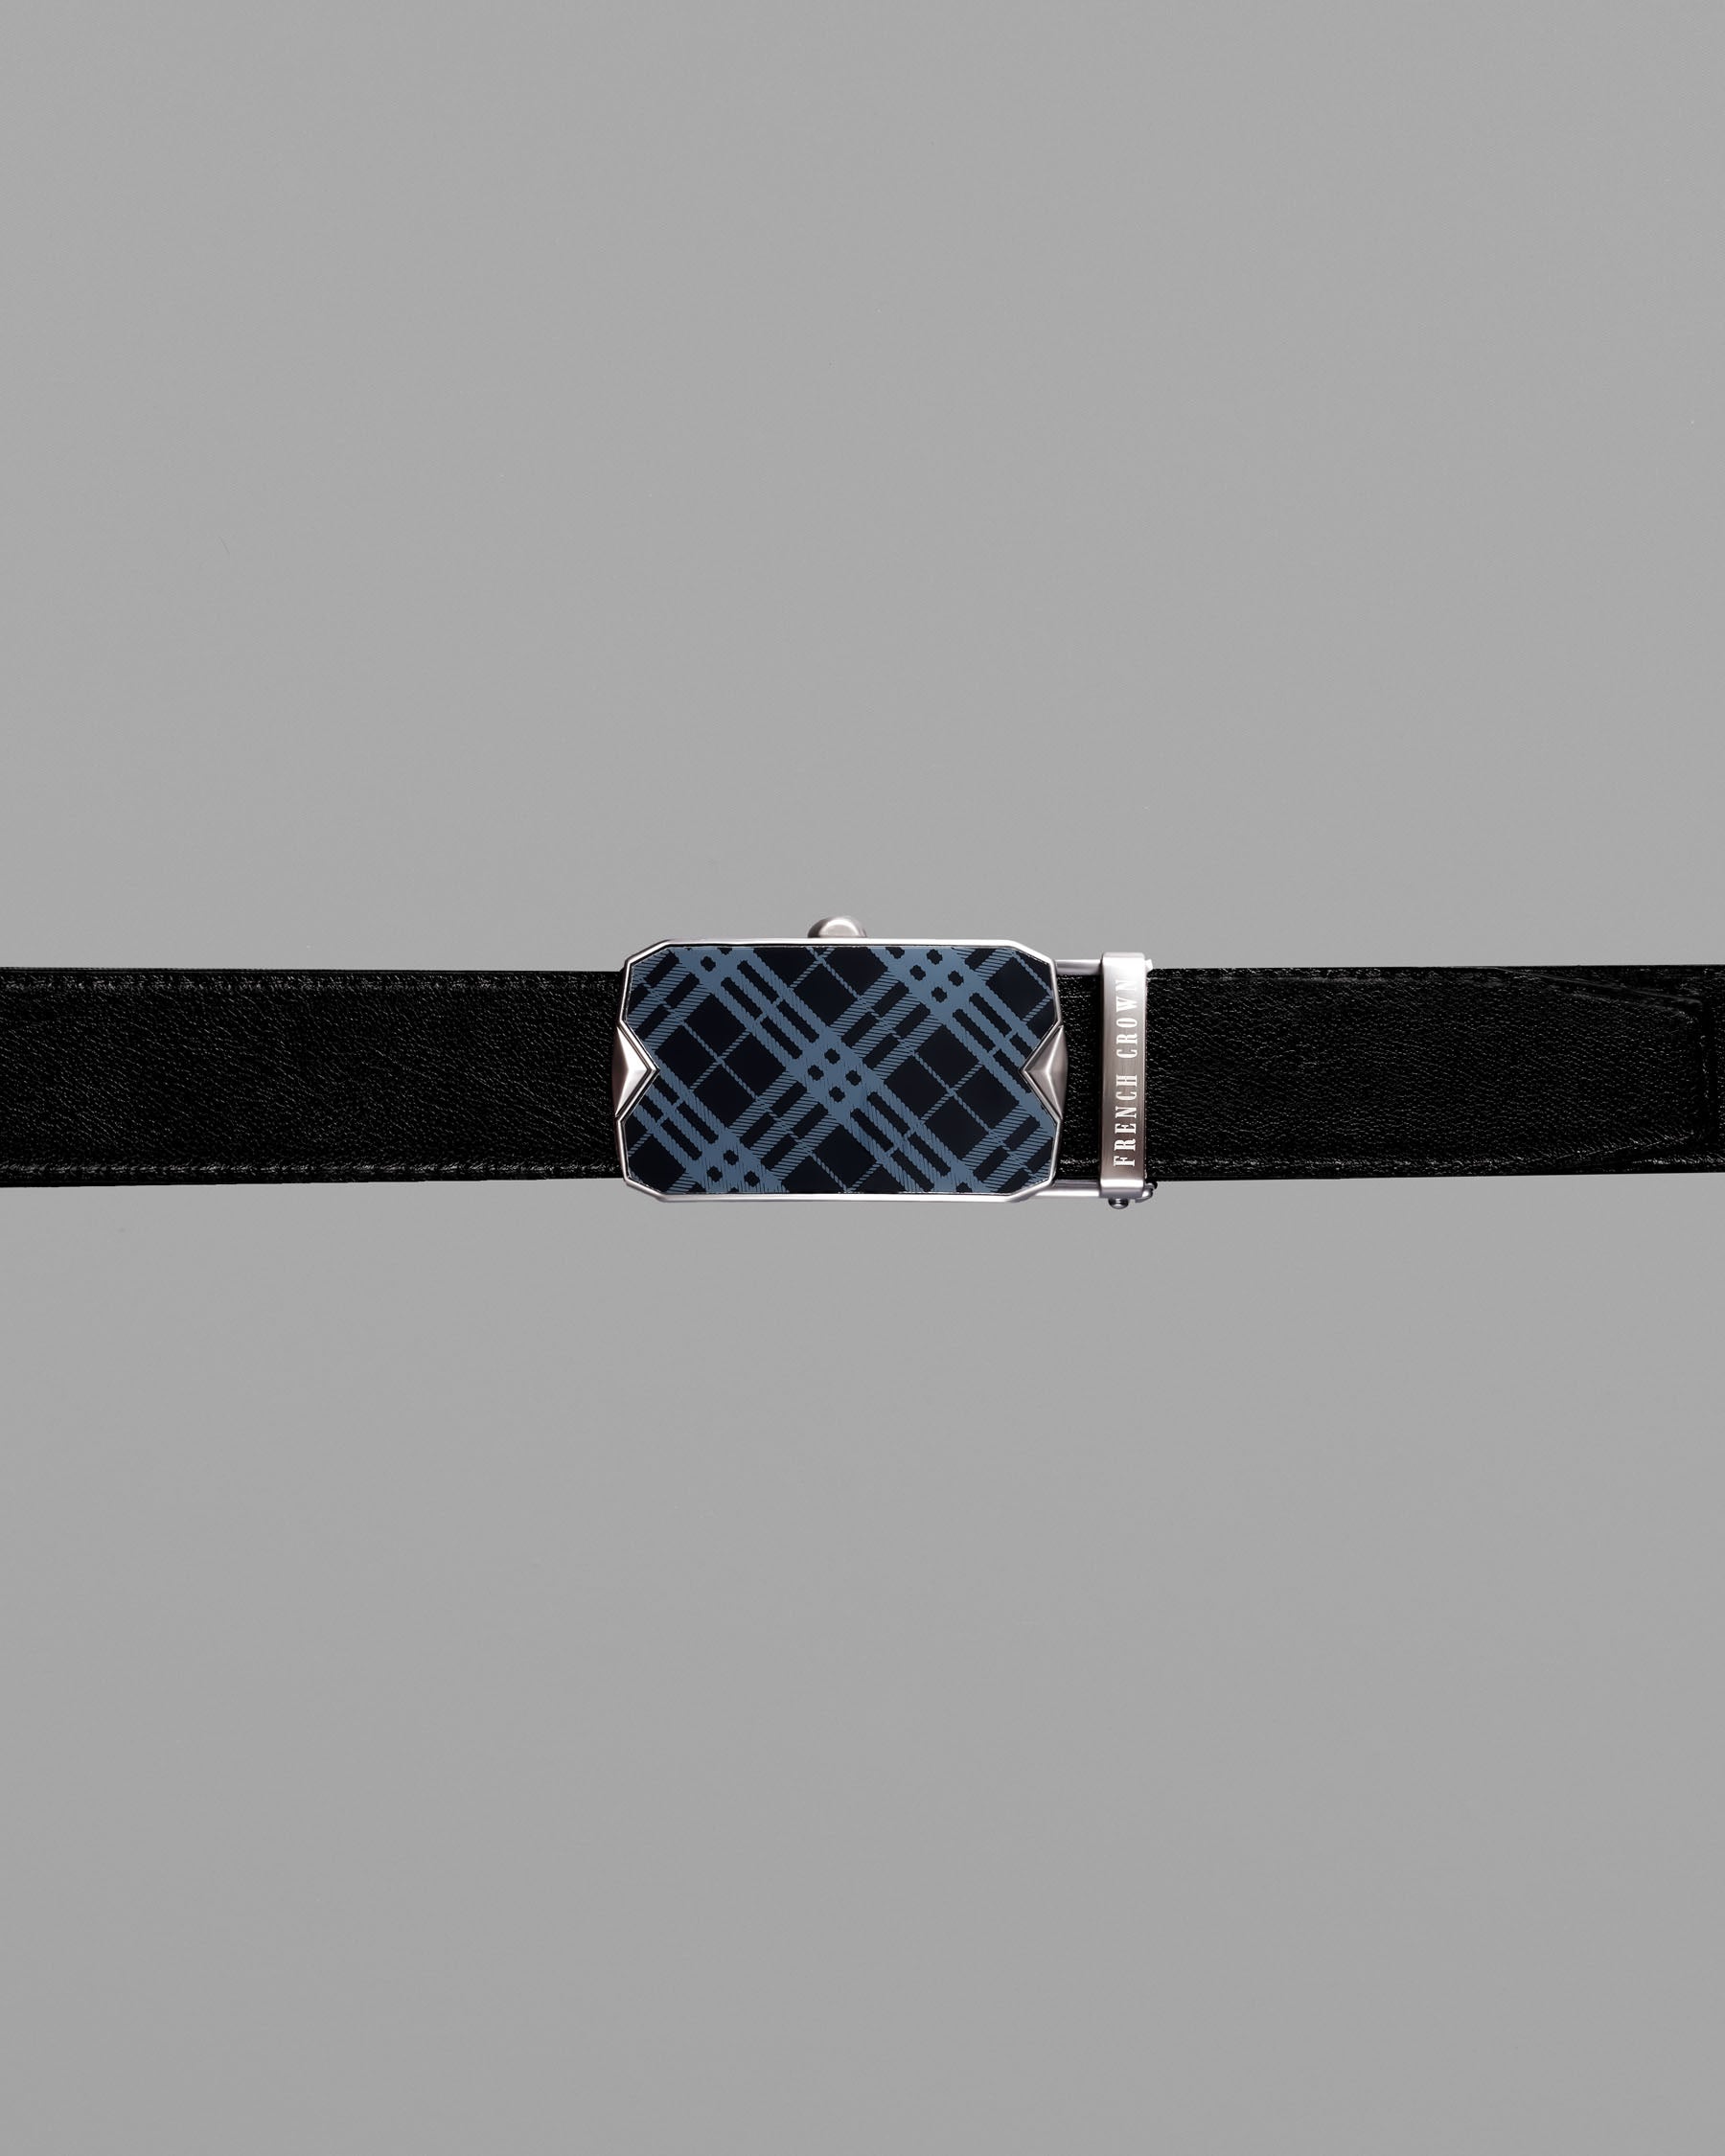 Matt Grey Checkered buckle No hole Reversible jade Black and Brown Vegan Leather Handcrafted Belt